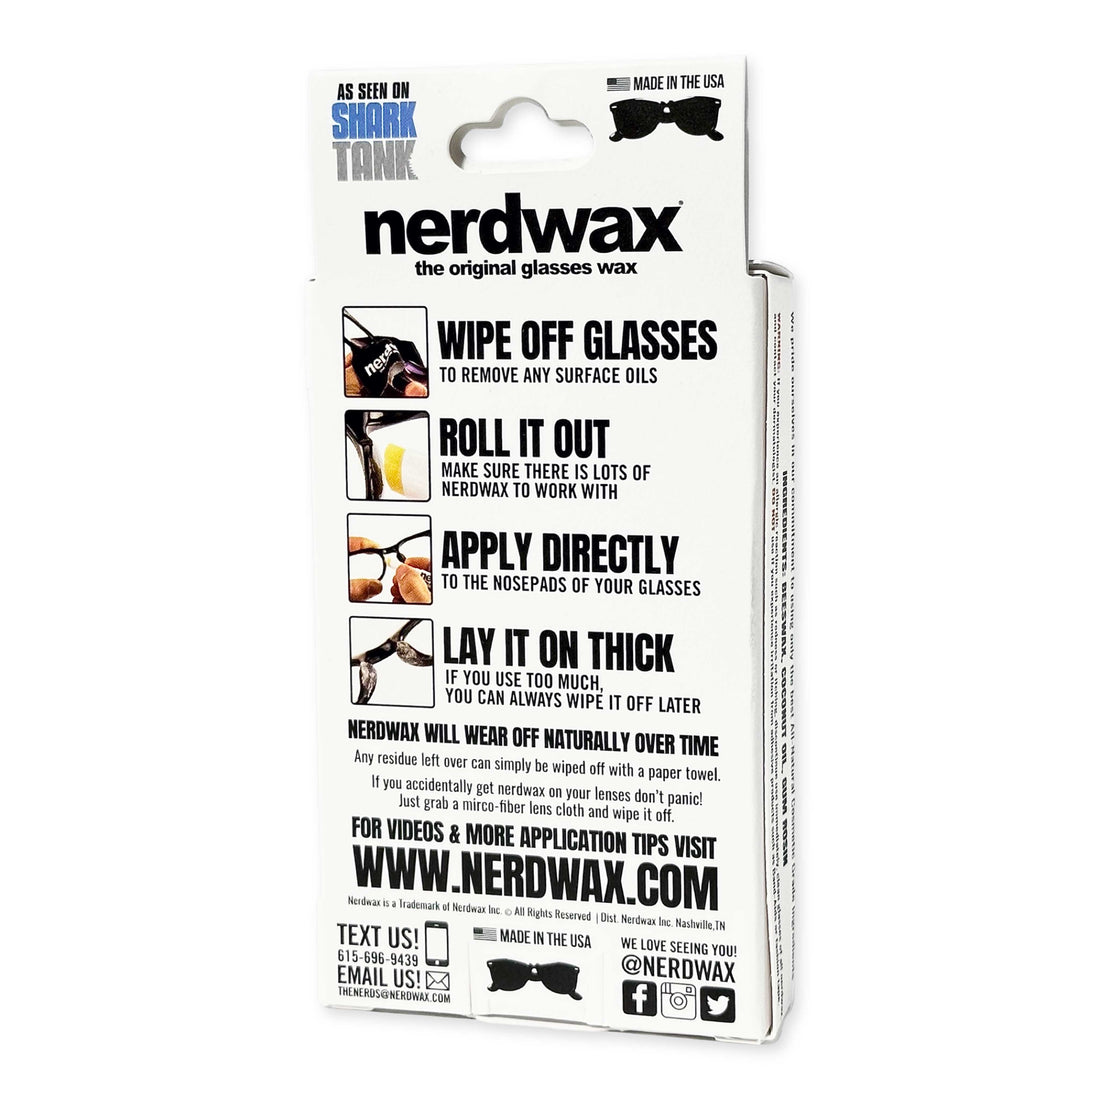 Nerdwax-Low Tech Solution to a Common Problem